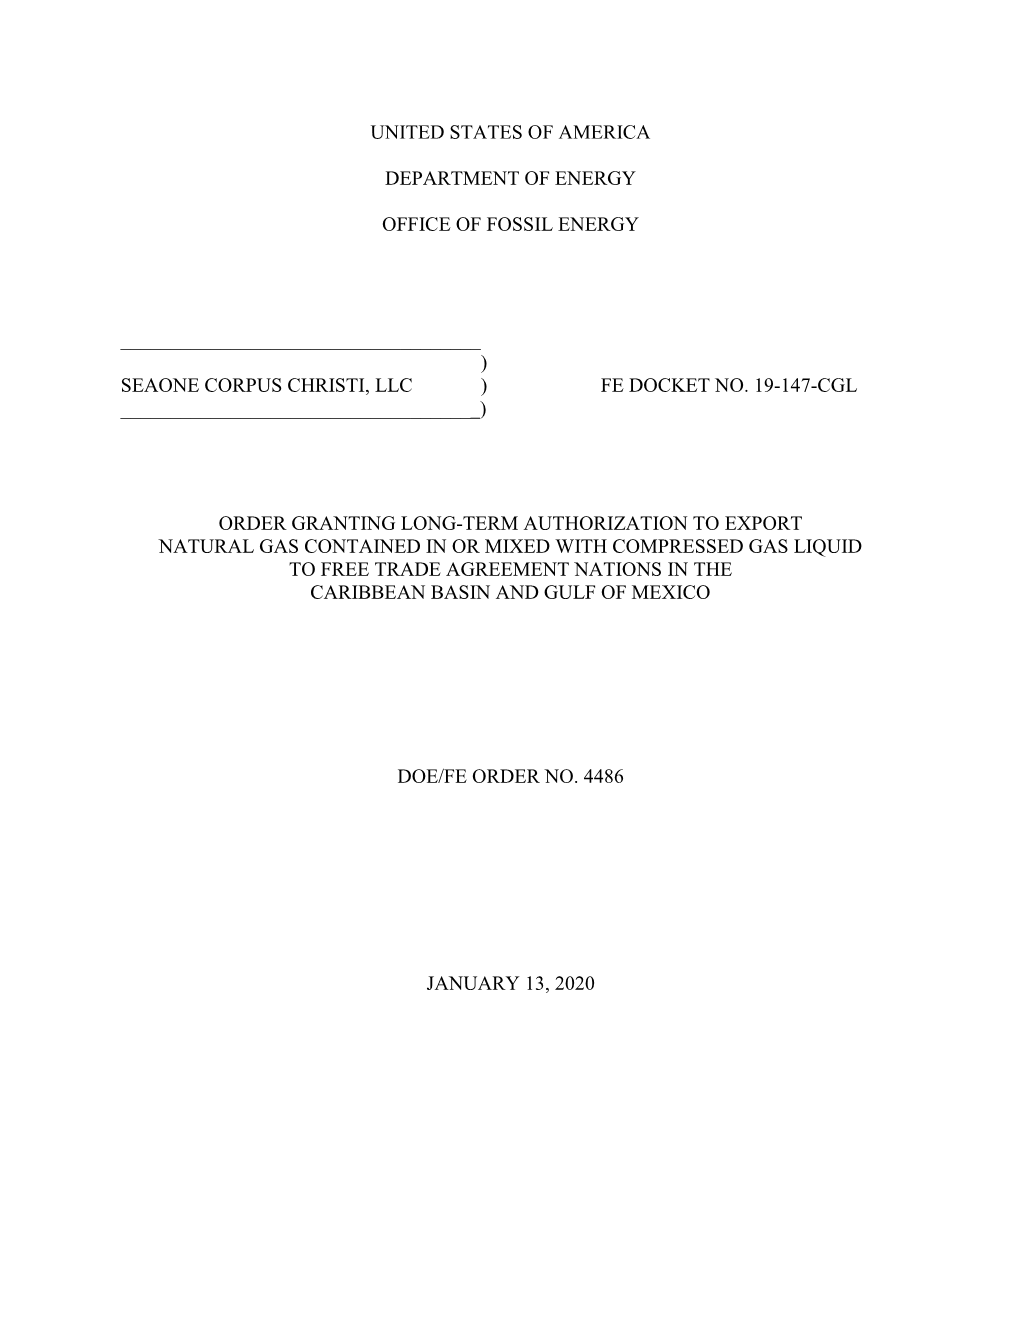 Order 4486 Granting Long-Term Authorization to Export Natural Gas